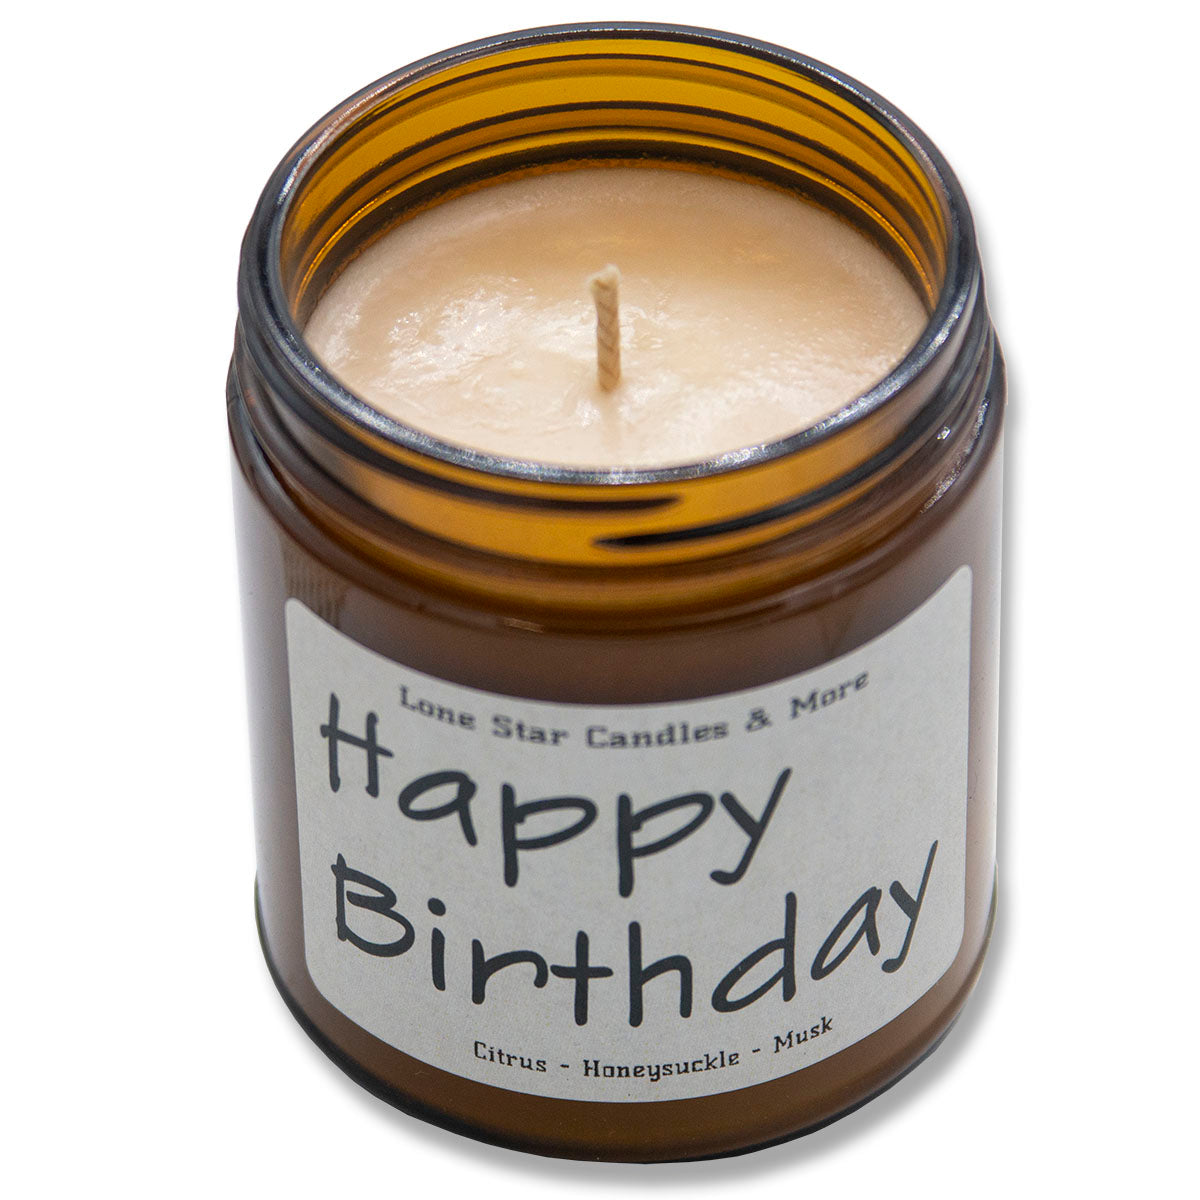 Honeysuckle, Lone Star Candles & More's Premium Hand Poured Strongly Scented Soy Wax Gift Candle, The perfect Spring and Summer-Time Scent, USA Made in Texas, Round Amber Glass Jar 9oz Happy Birthday